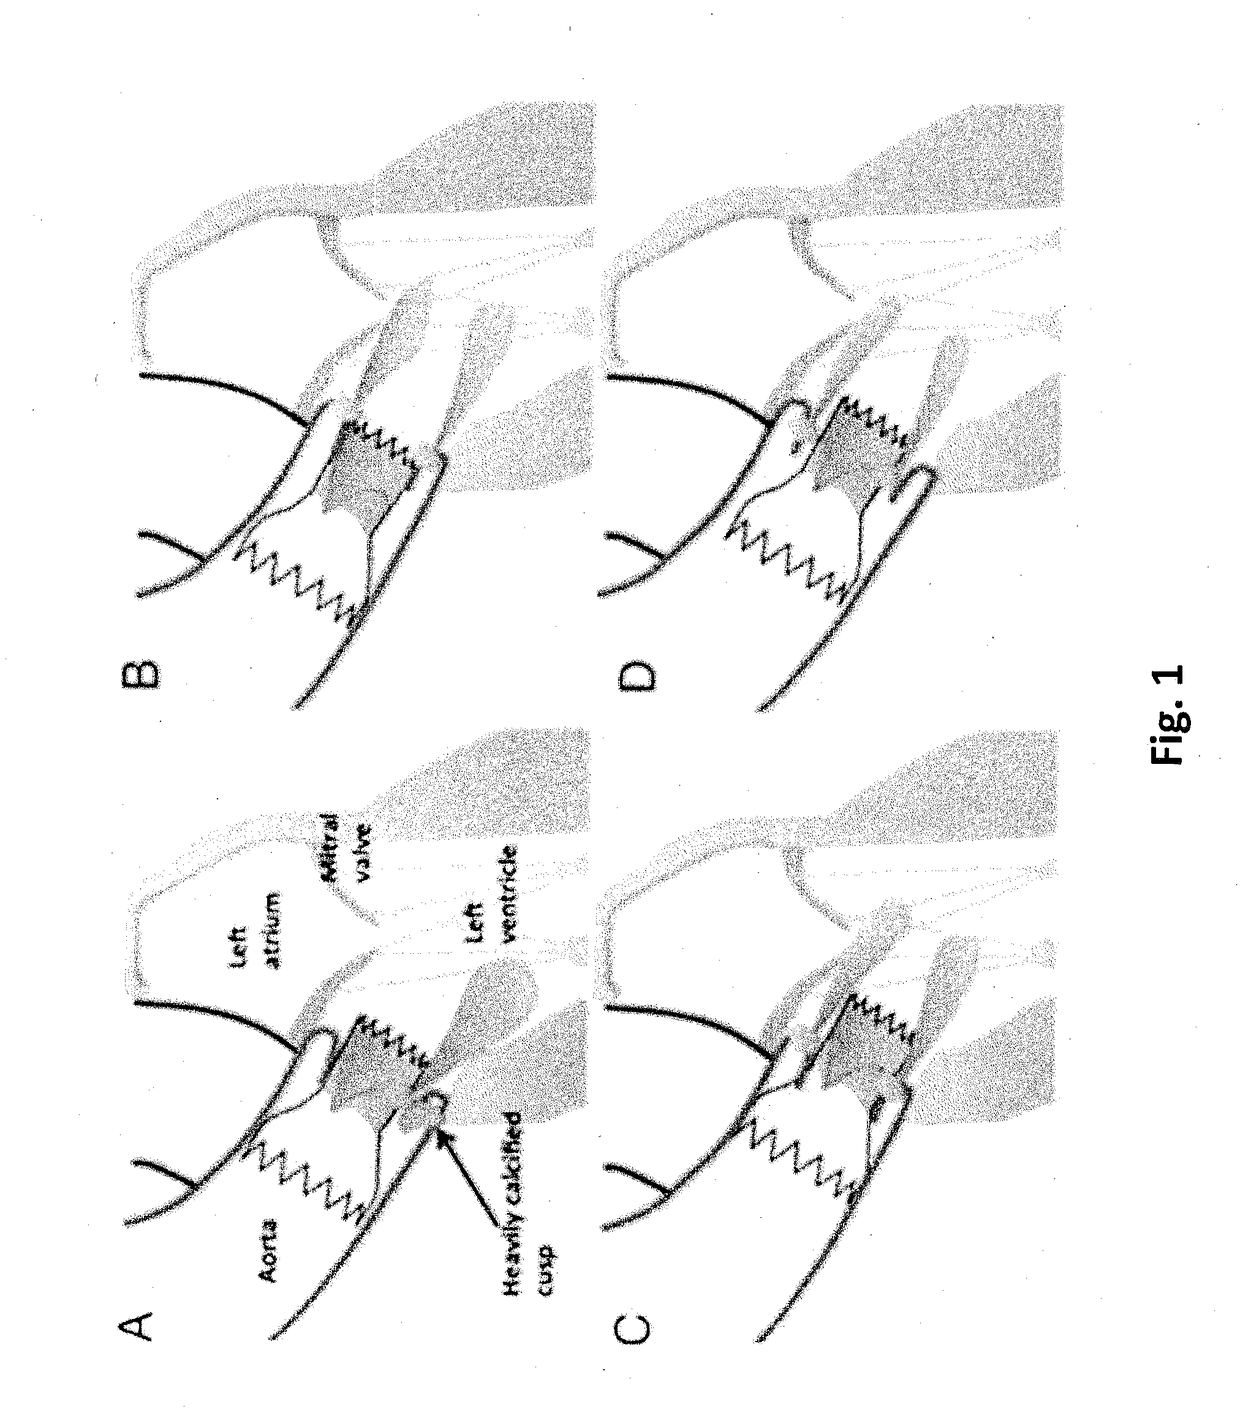 Ultrasound-guided delivery system for accurate positioning/repositioning of transcatheter heart valves